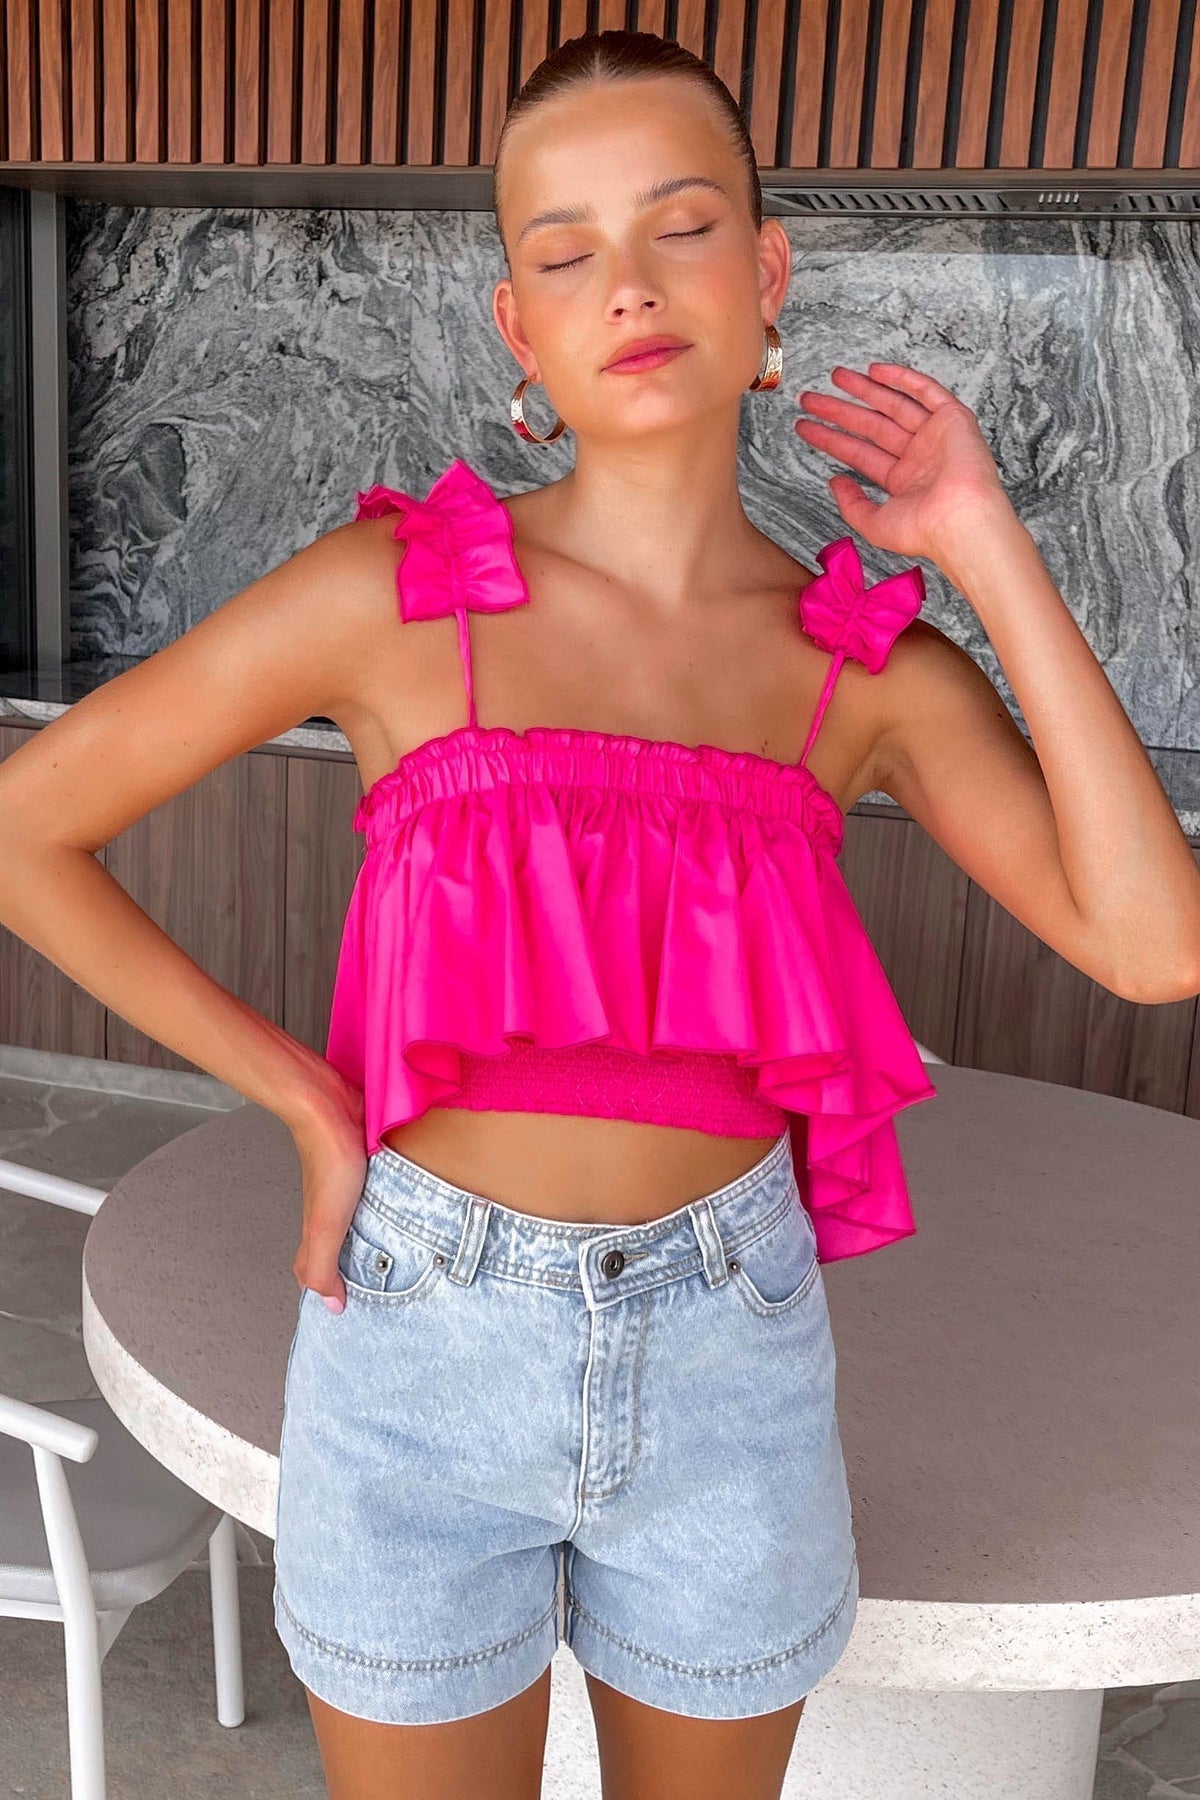 Fyie Top, COTTON &amp; POLYESTER, COTTON AND POLYESTER, CROP TOP, CROP TOPS, new arrivals, PINK, POLYESTER AND COTTON, TOP, TOPS, , -MISHKAH